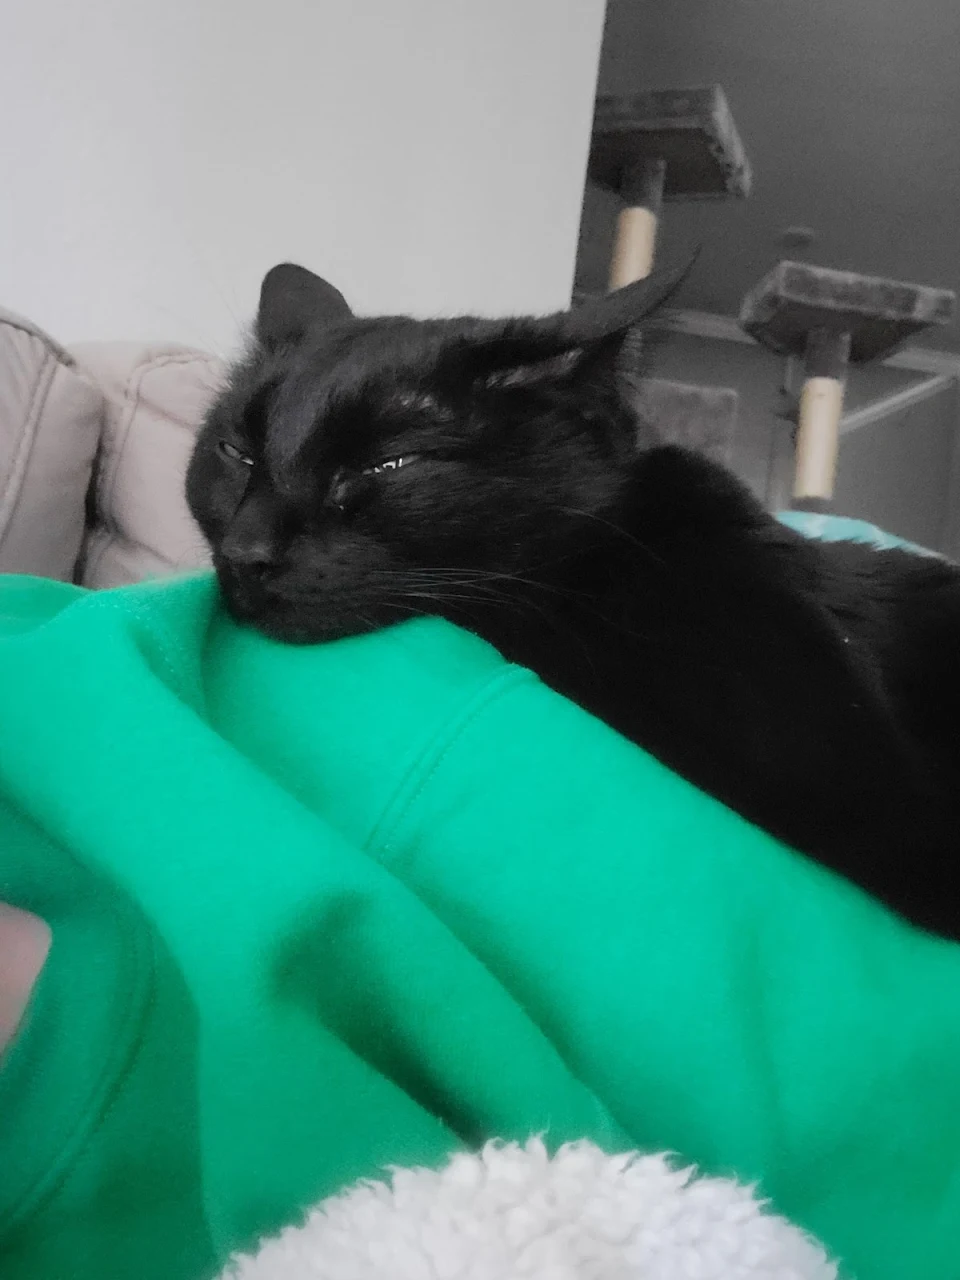 Snuggles from my cat that isn't usually a snuggler. Makes me happy to see her comfortable and relaxed like this!